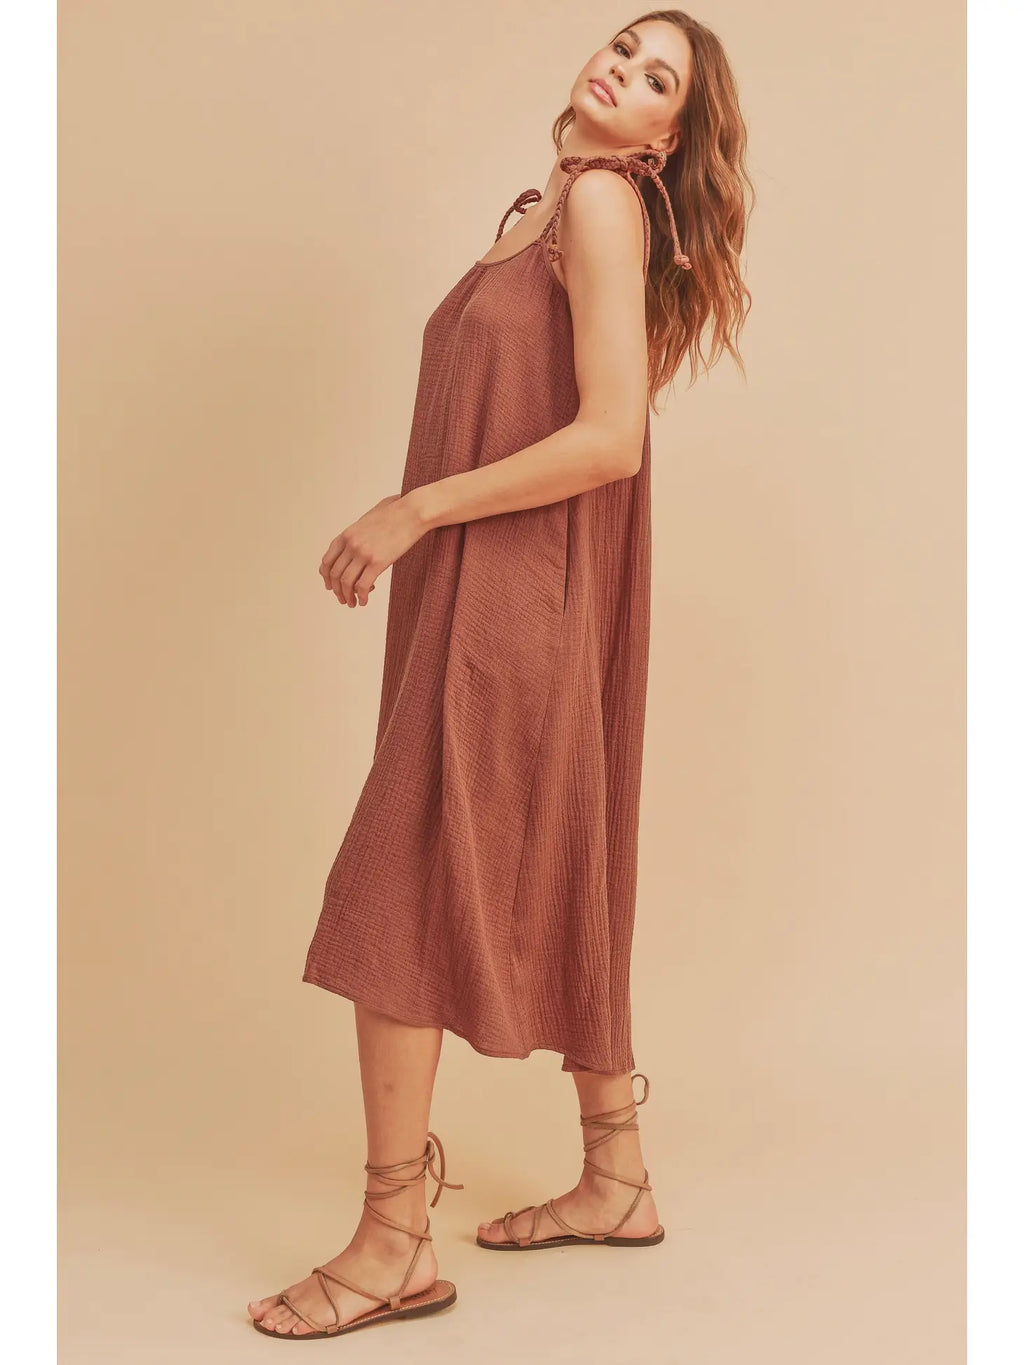 : Casual Connections Terracotta Tank Dress - Catching Fireflies Boutique